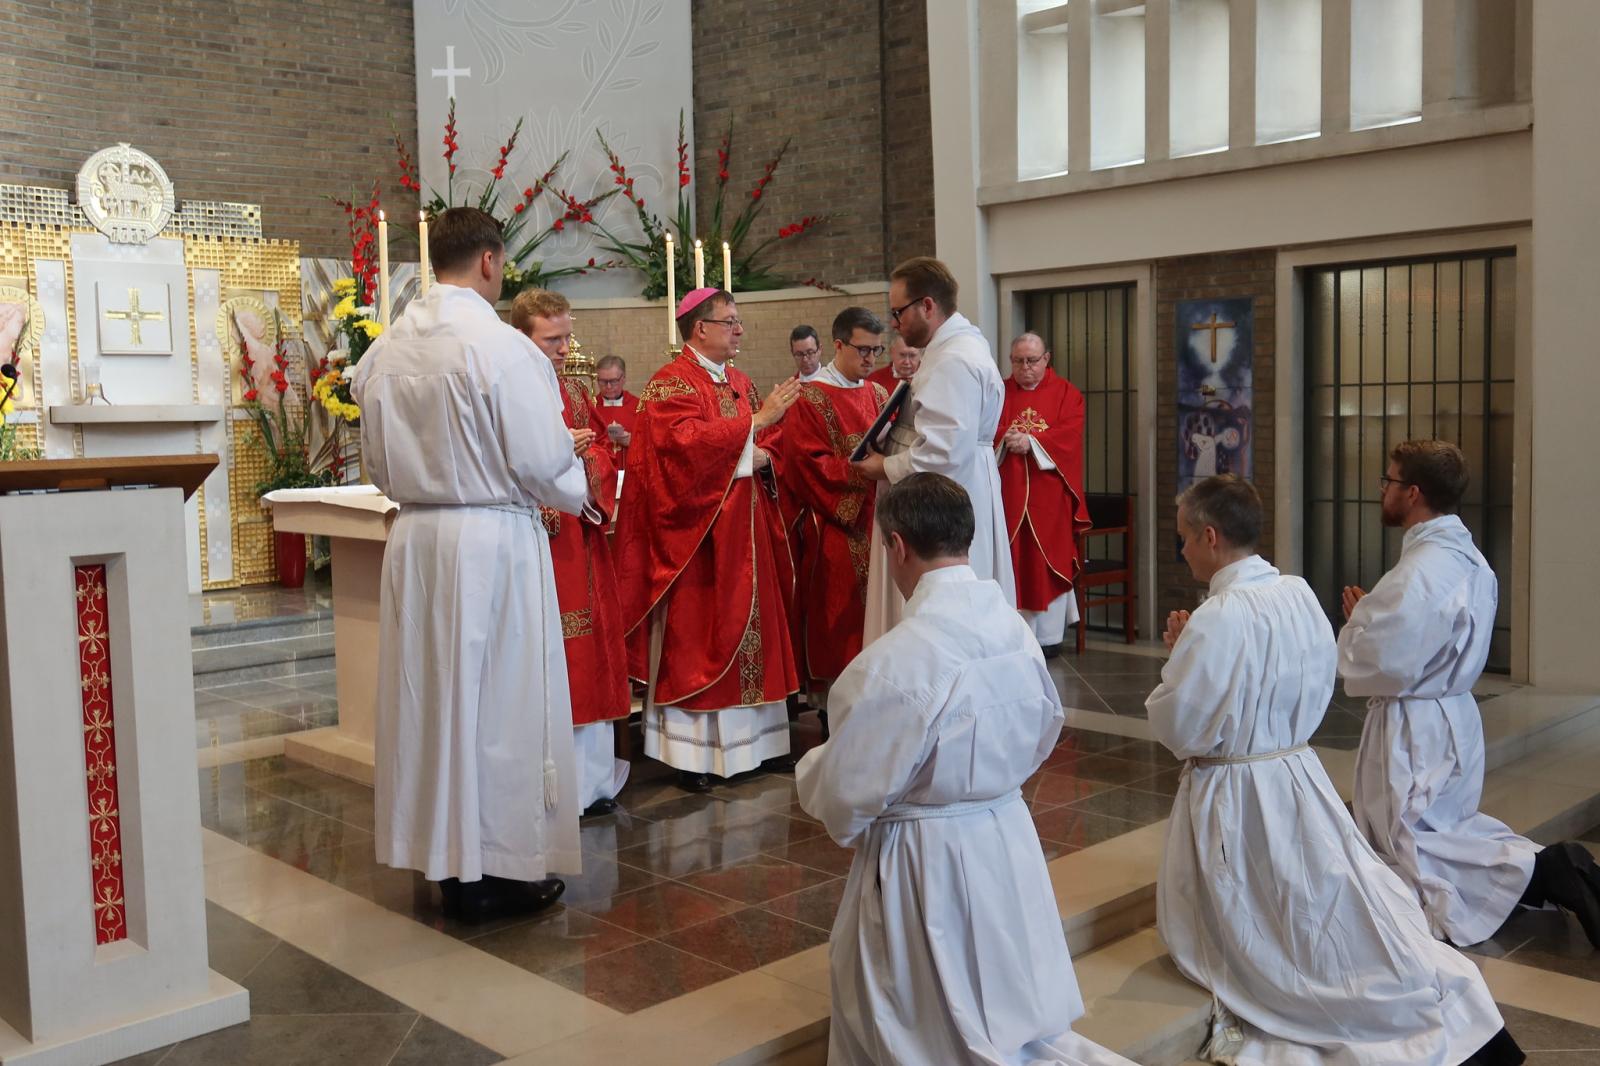 Homily for the Mass of Acolytate - Diocese of Westminster